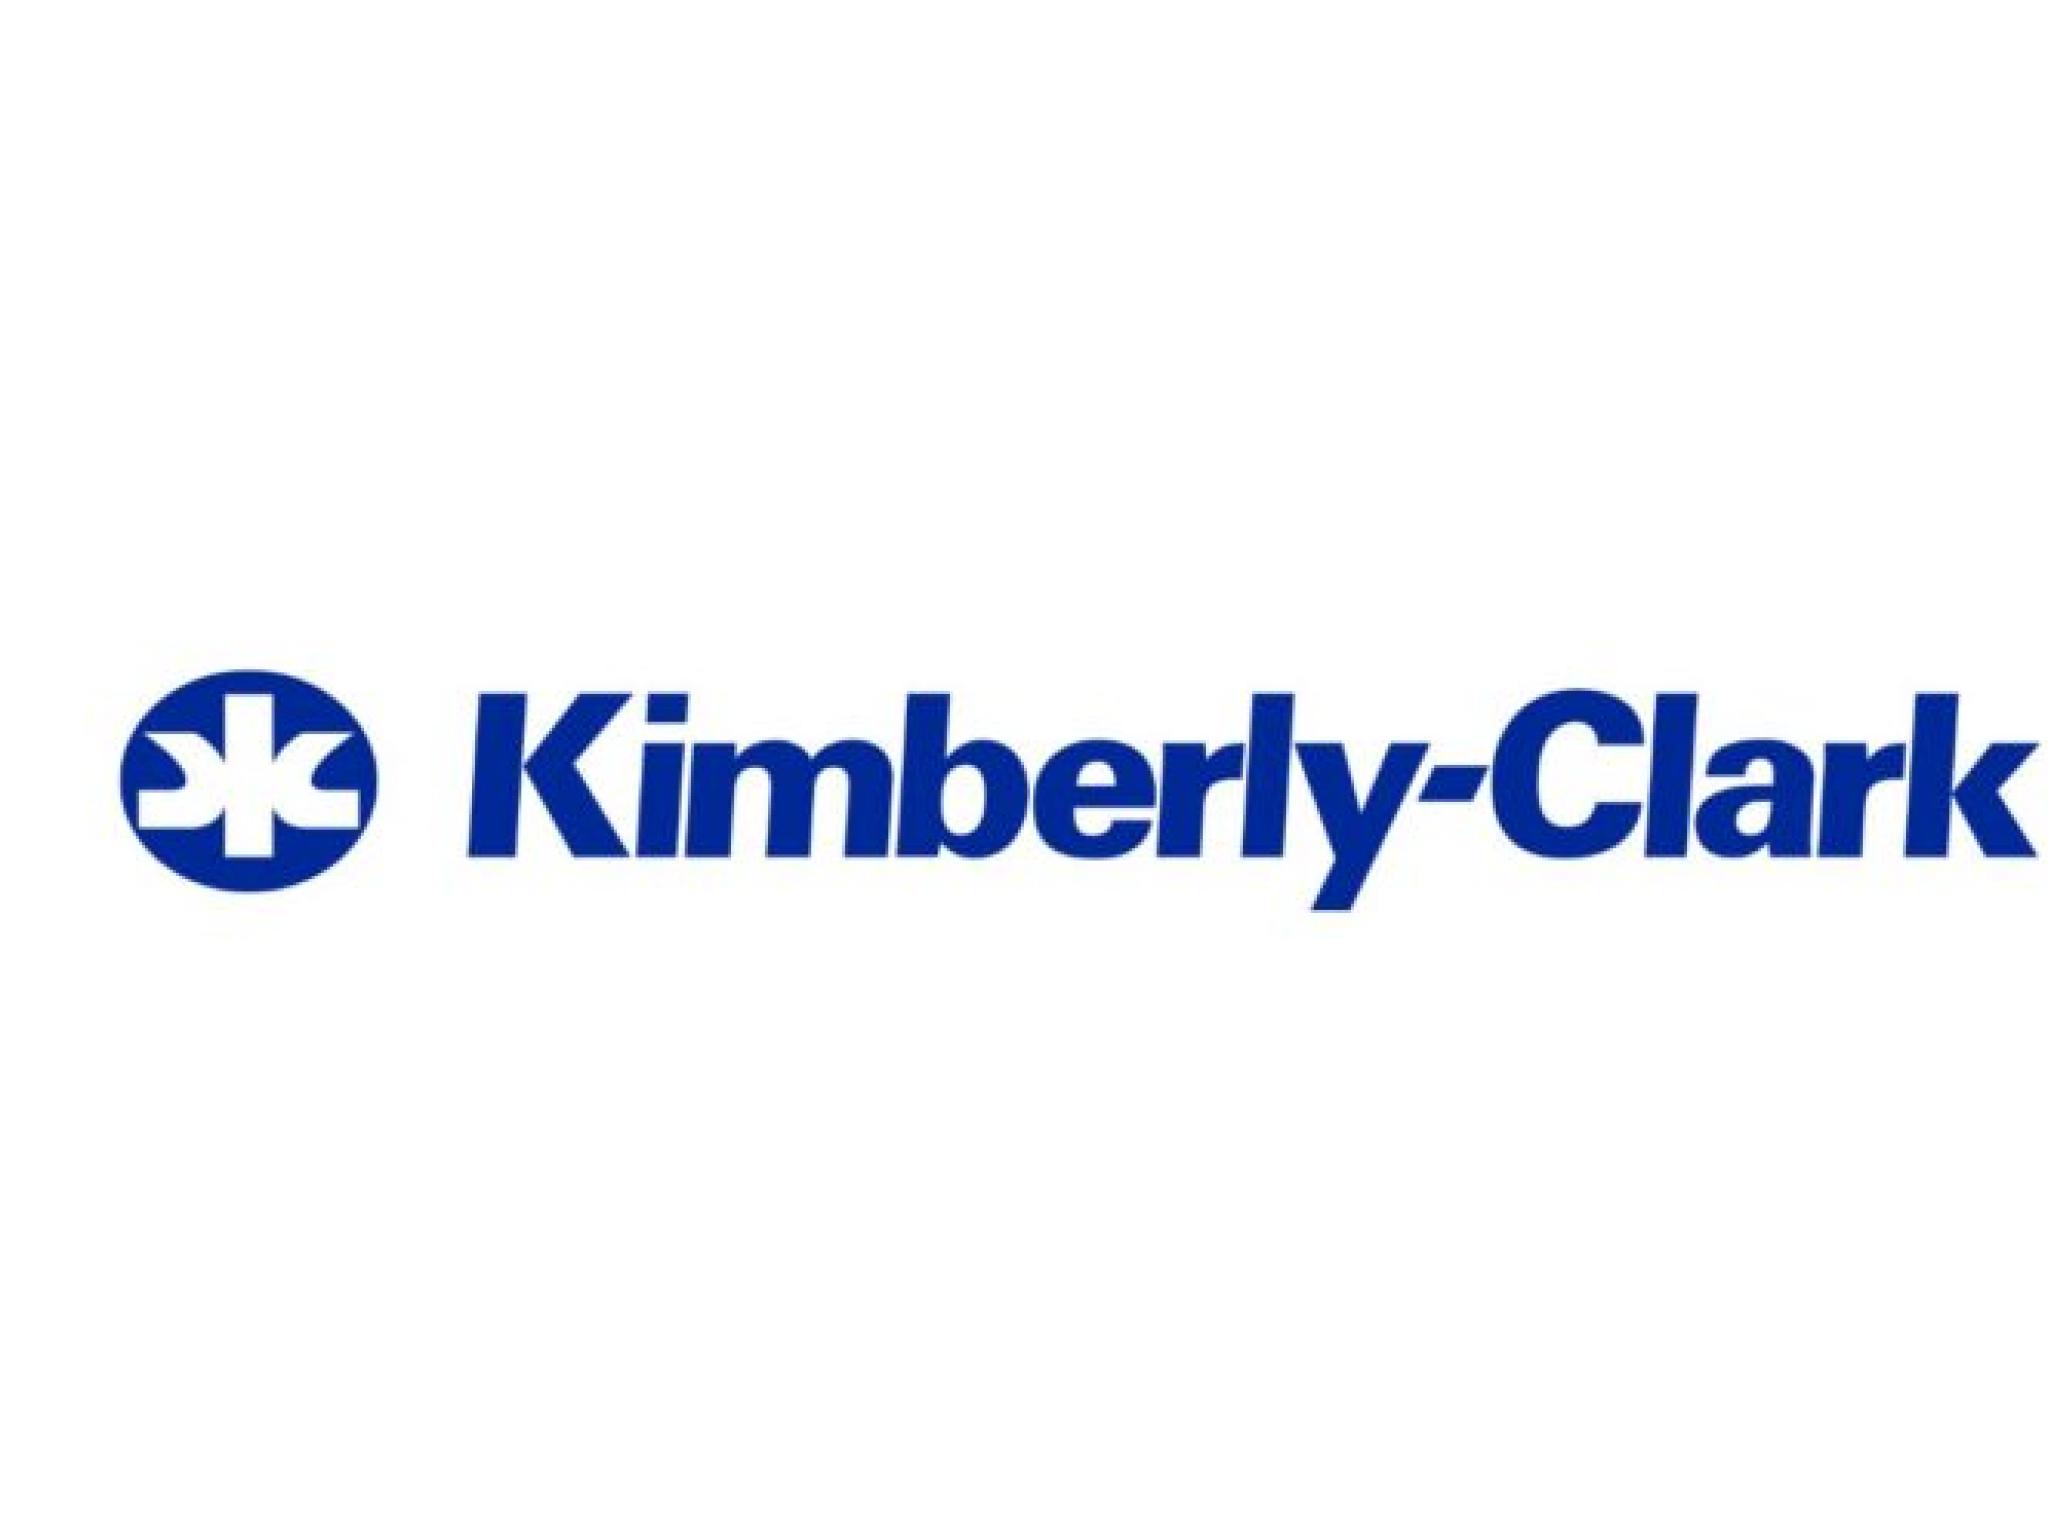  kimberly-clark-to-rally-around-24-here-are-10-top-analyst-forecasts-for-monday 